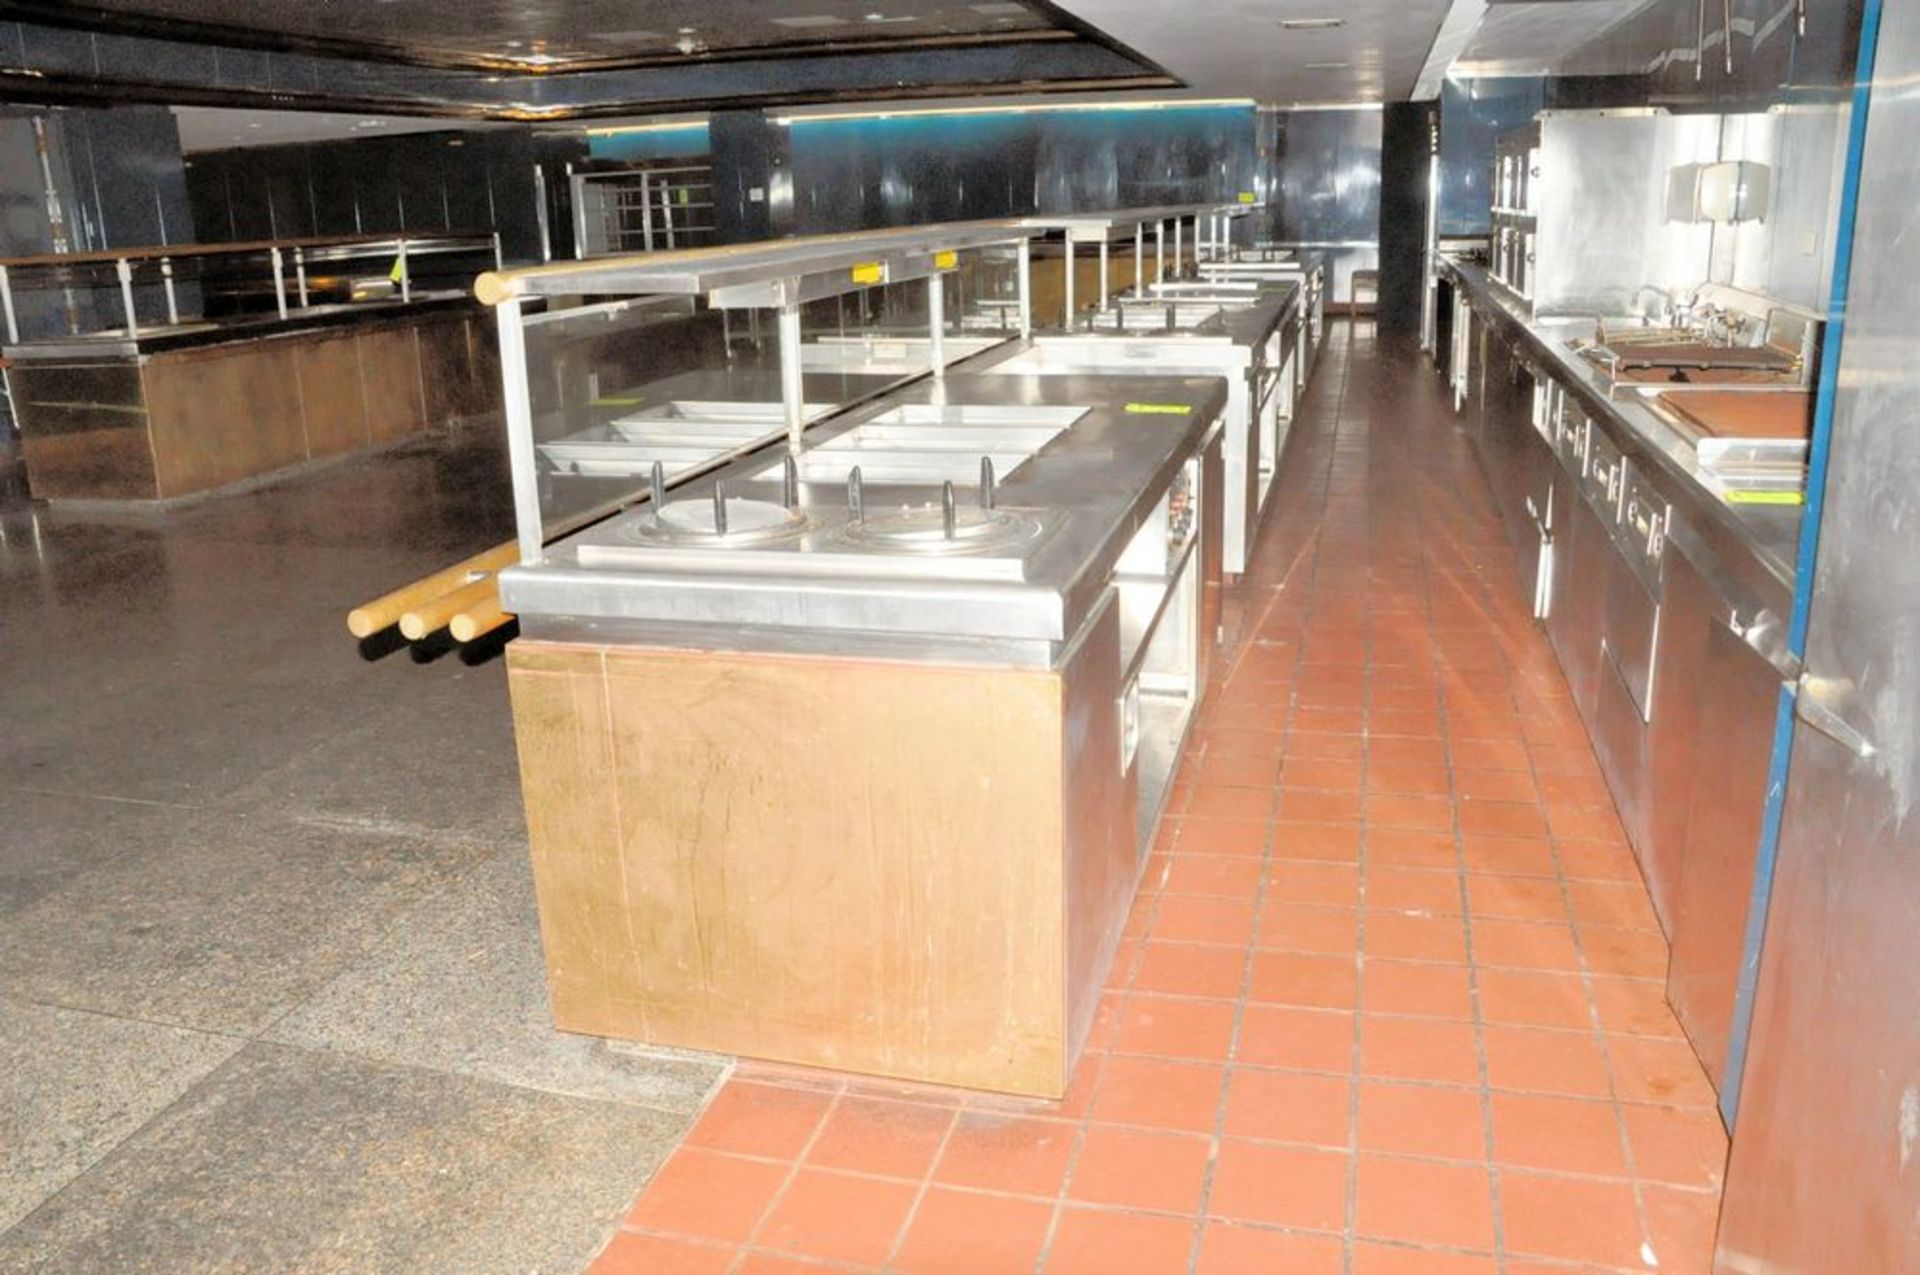 Hobart Stainless Steel Hot Foods Server System, 3' x 39' 6", (1) Unit Has 3-Compartments and (2) - Image 2 of 13